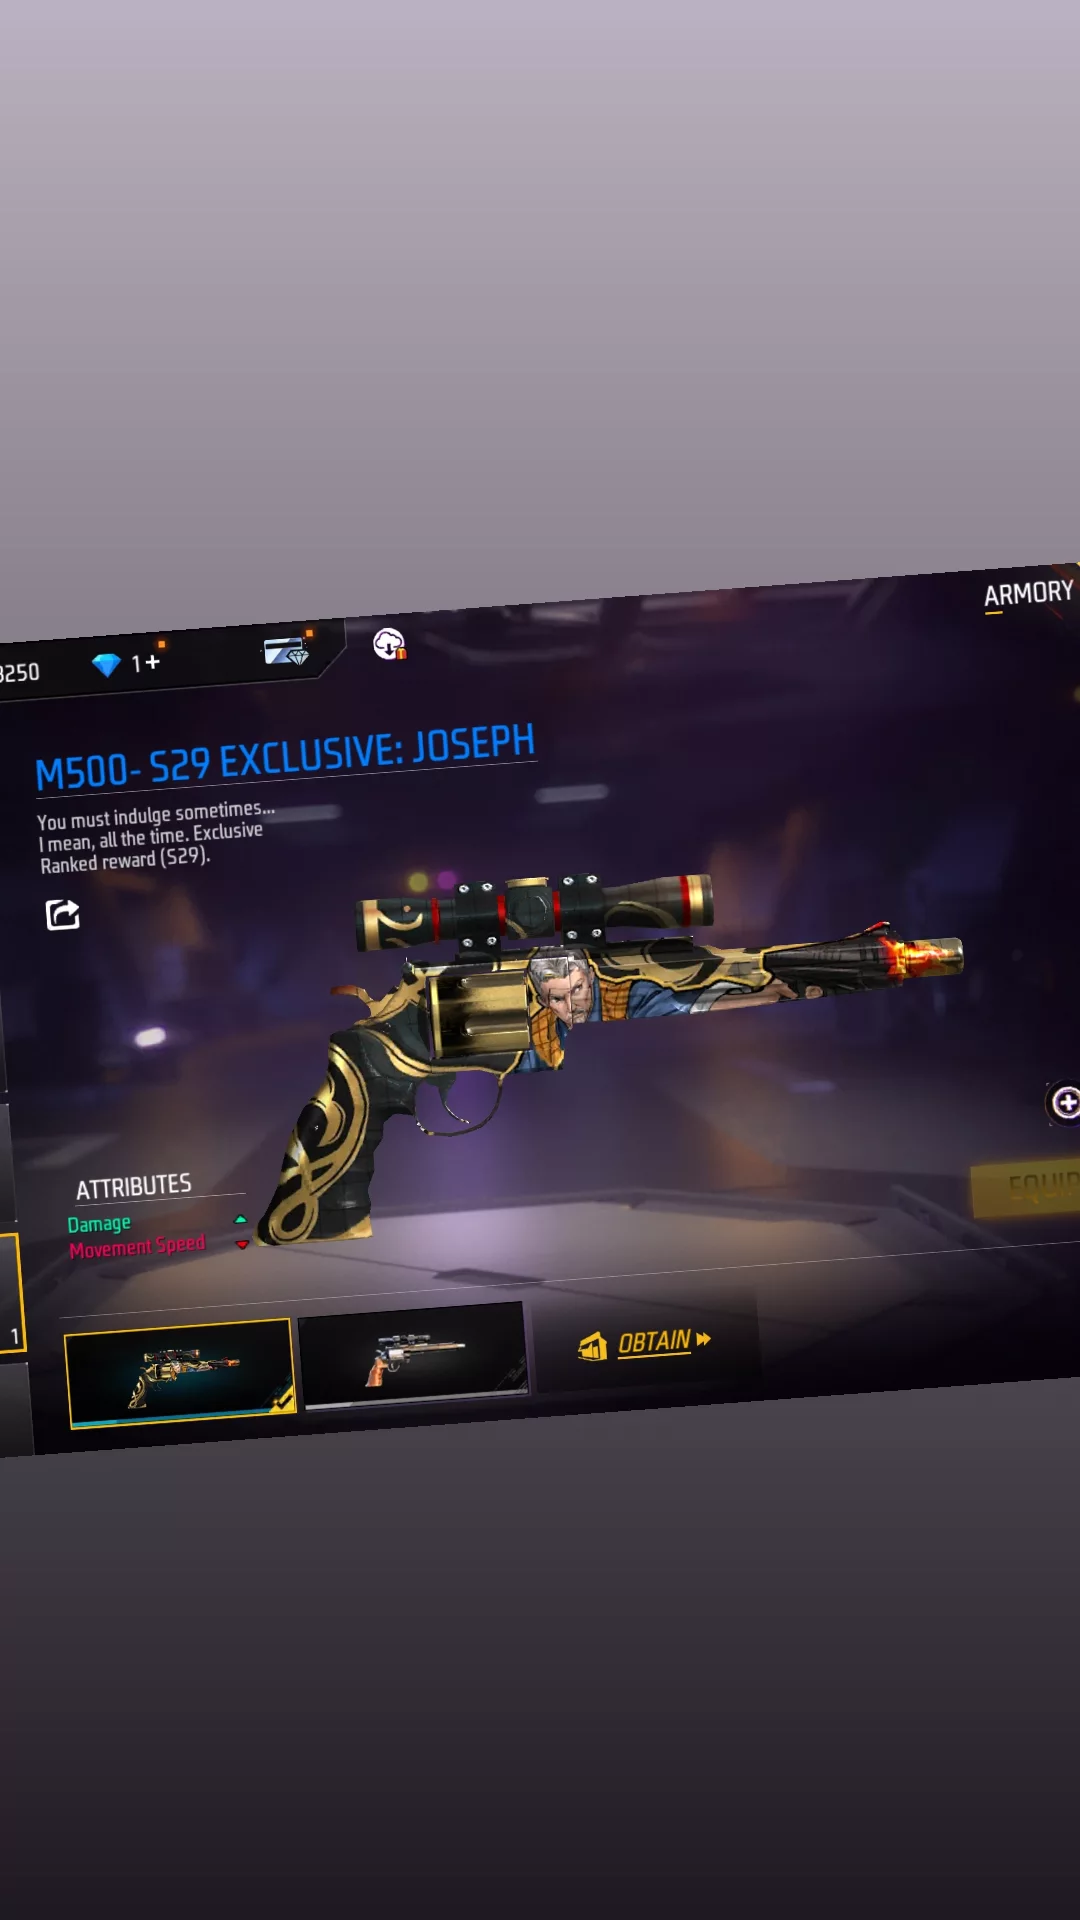 Took long enough. But finally a M500 skin with real attributes : r/freefire